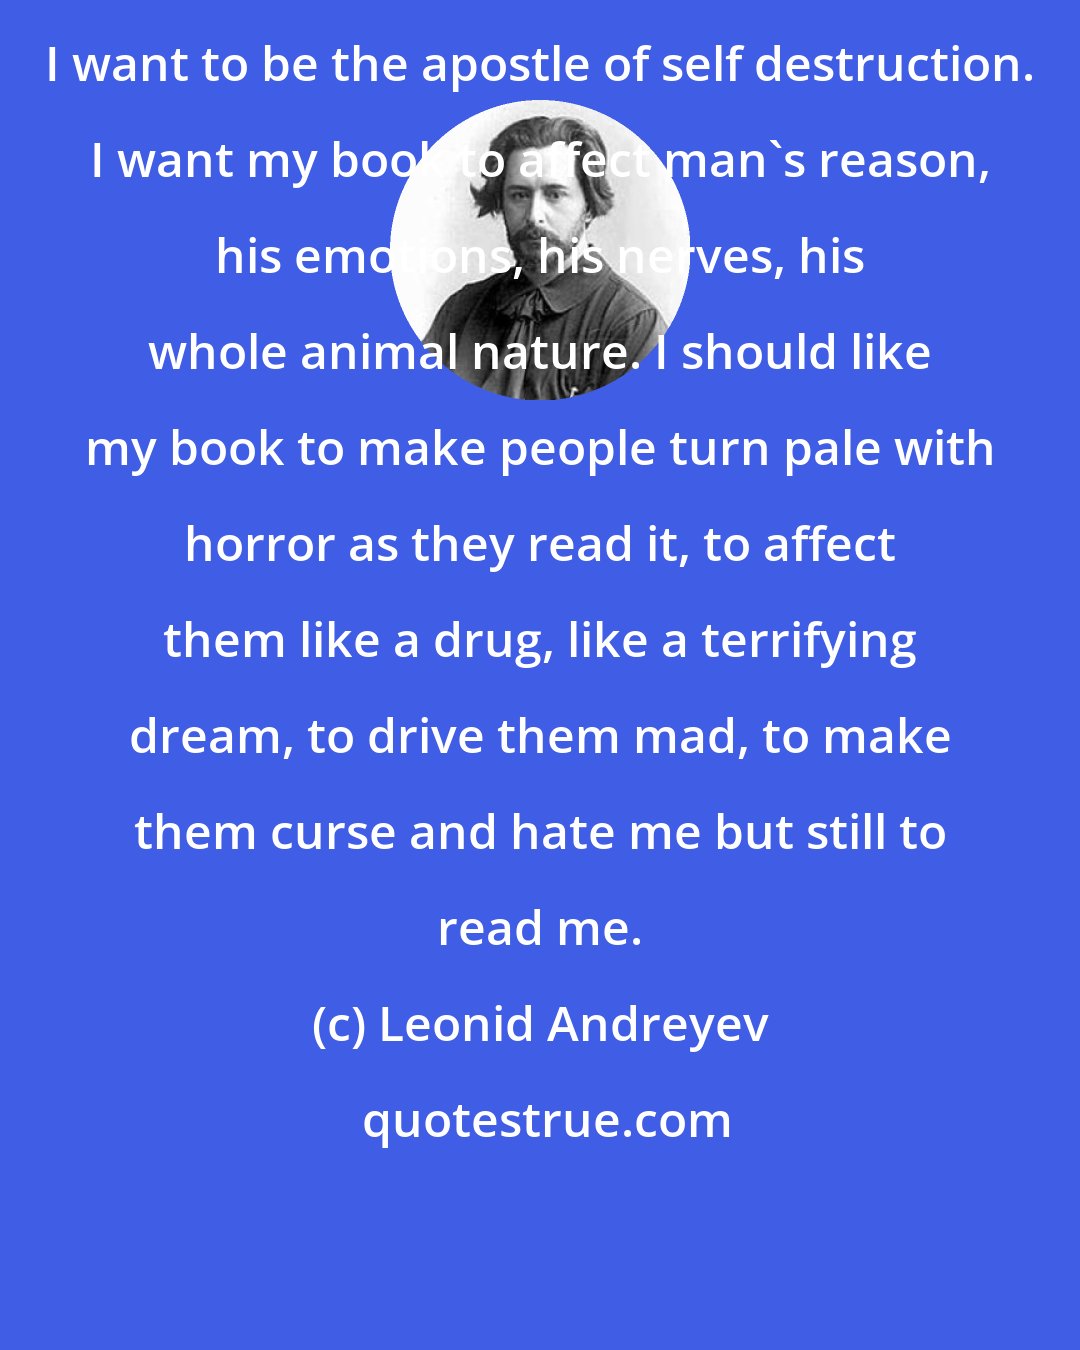 Leonid Andreyev: I want to be the apostle of self destruction. I want my book to affect man's reason, his emotions, his nerves, his whole animal nature. I should like my book to make people turn pale with horror as they read it, to affect them like a drug, like a terrifying dream, to drive them mad, to make them curse and hate me but still to read me.